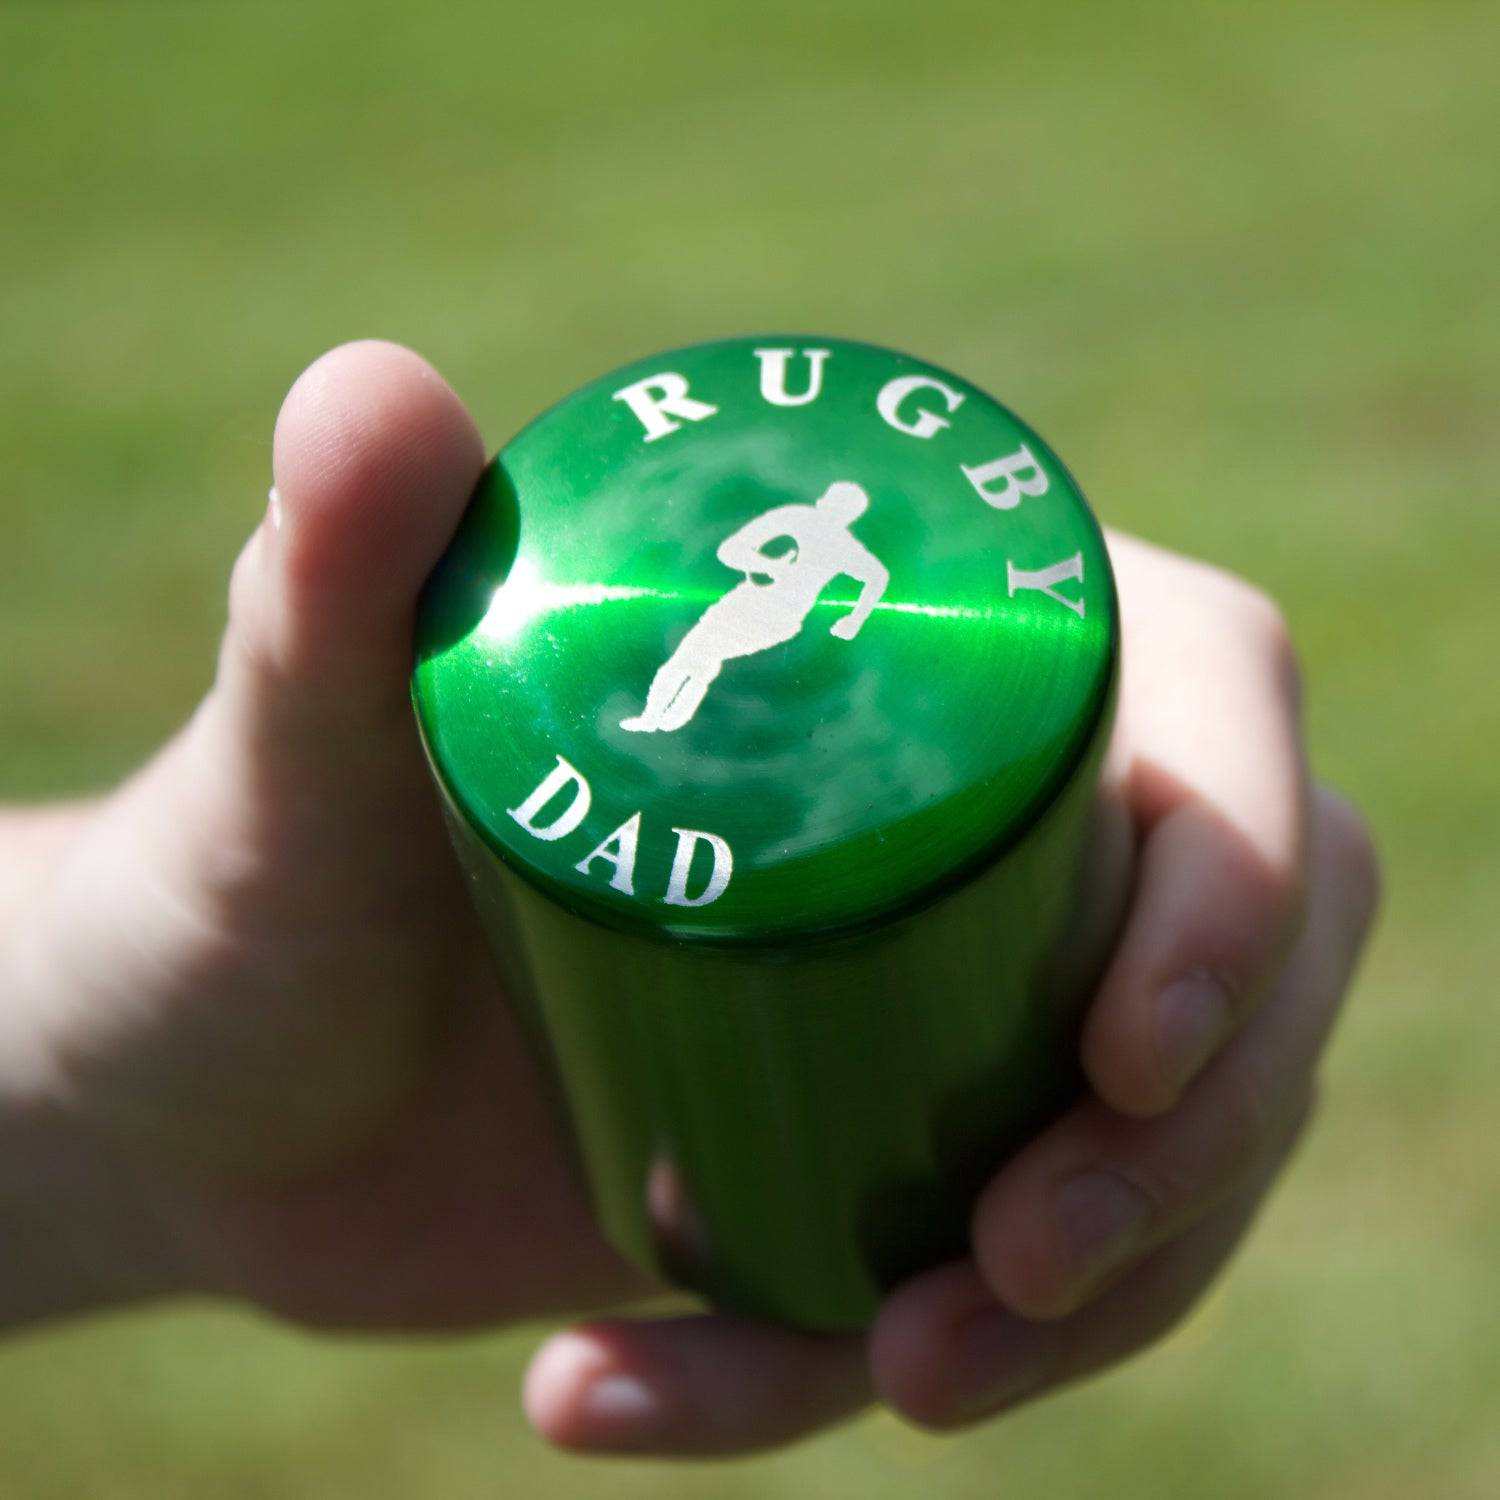 Father's Day Personalised Push-Down Bottle Opener - MYLEE London